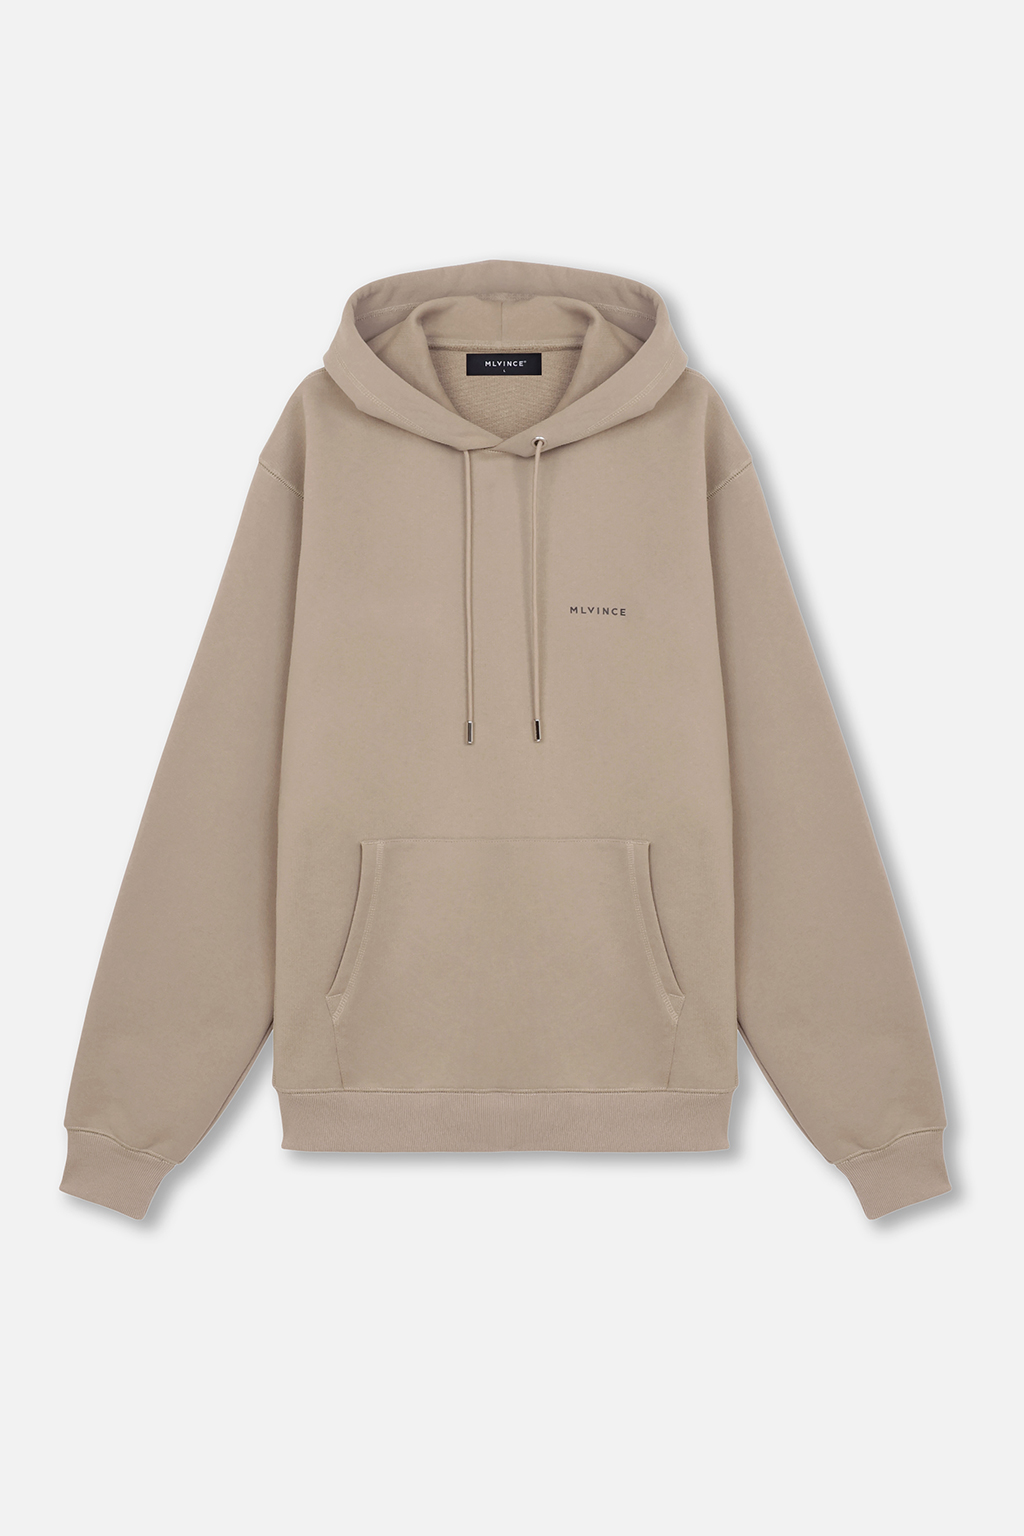 CLASSIC LOGO HEAVY WEIGHT HOODED